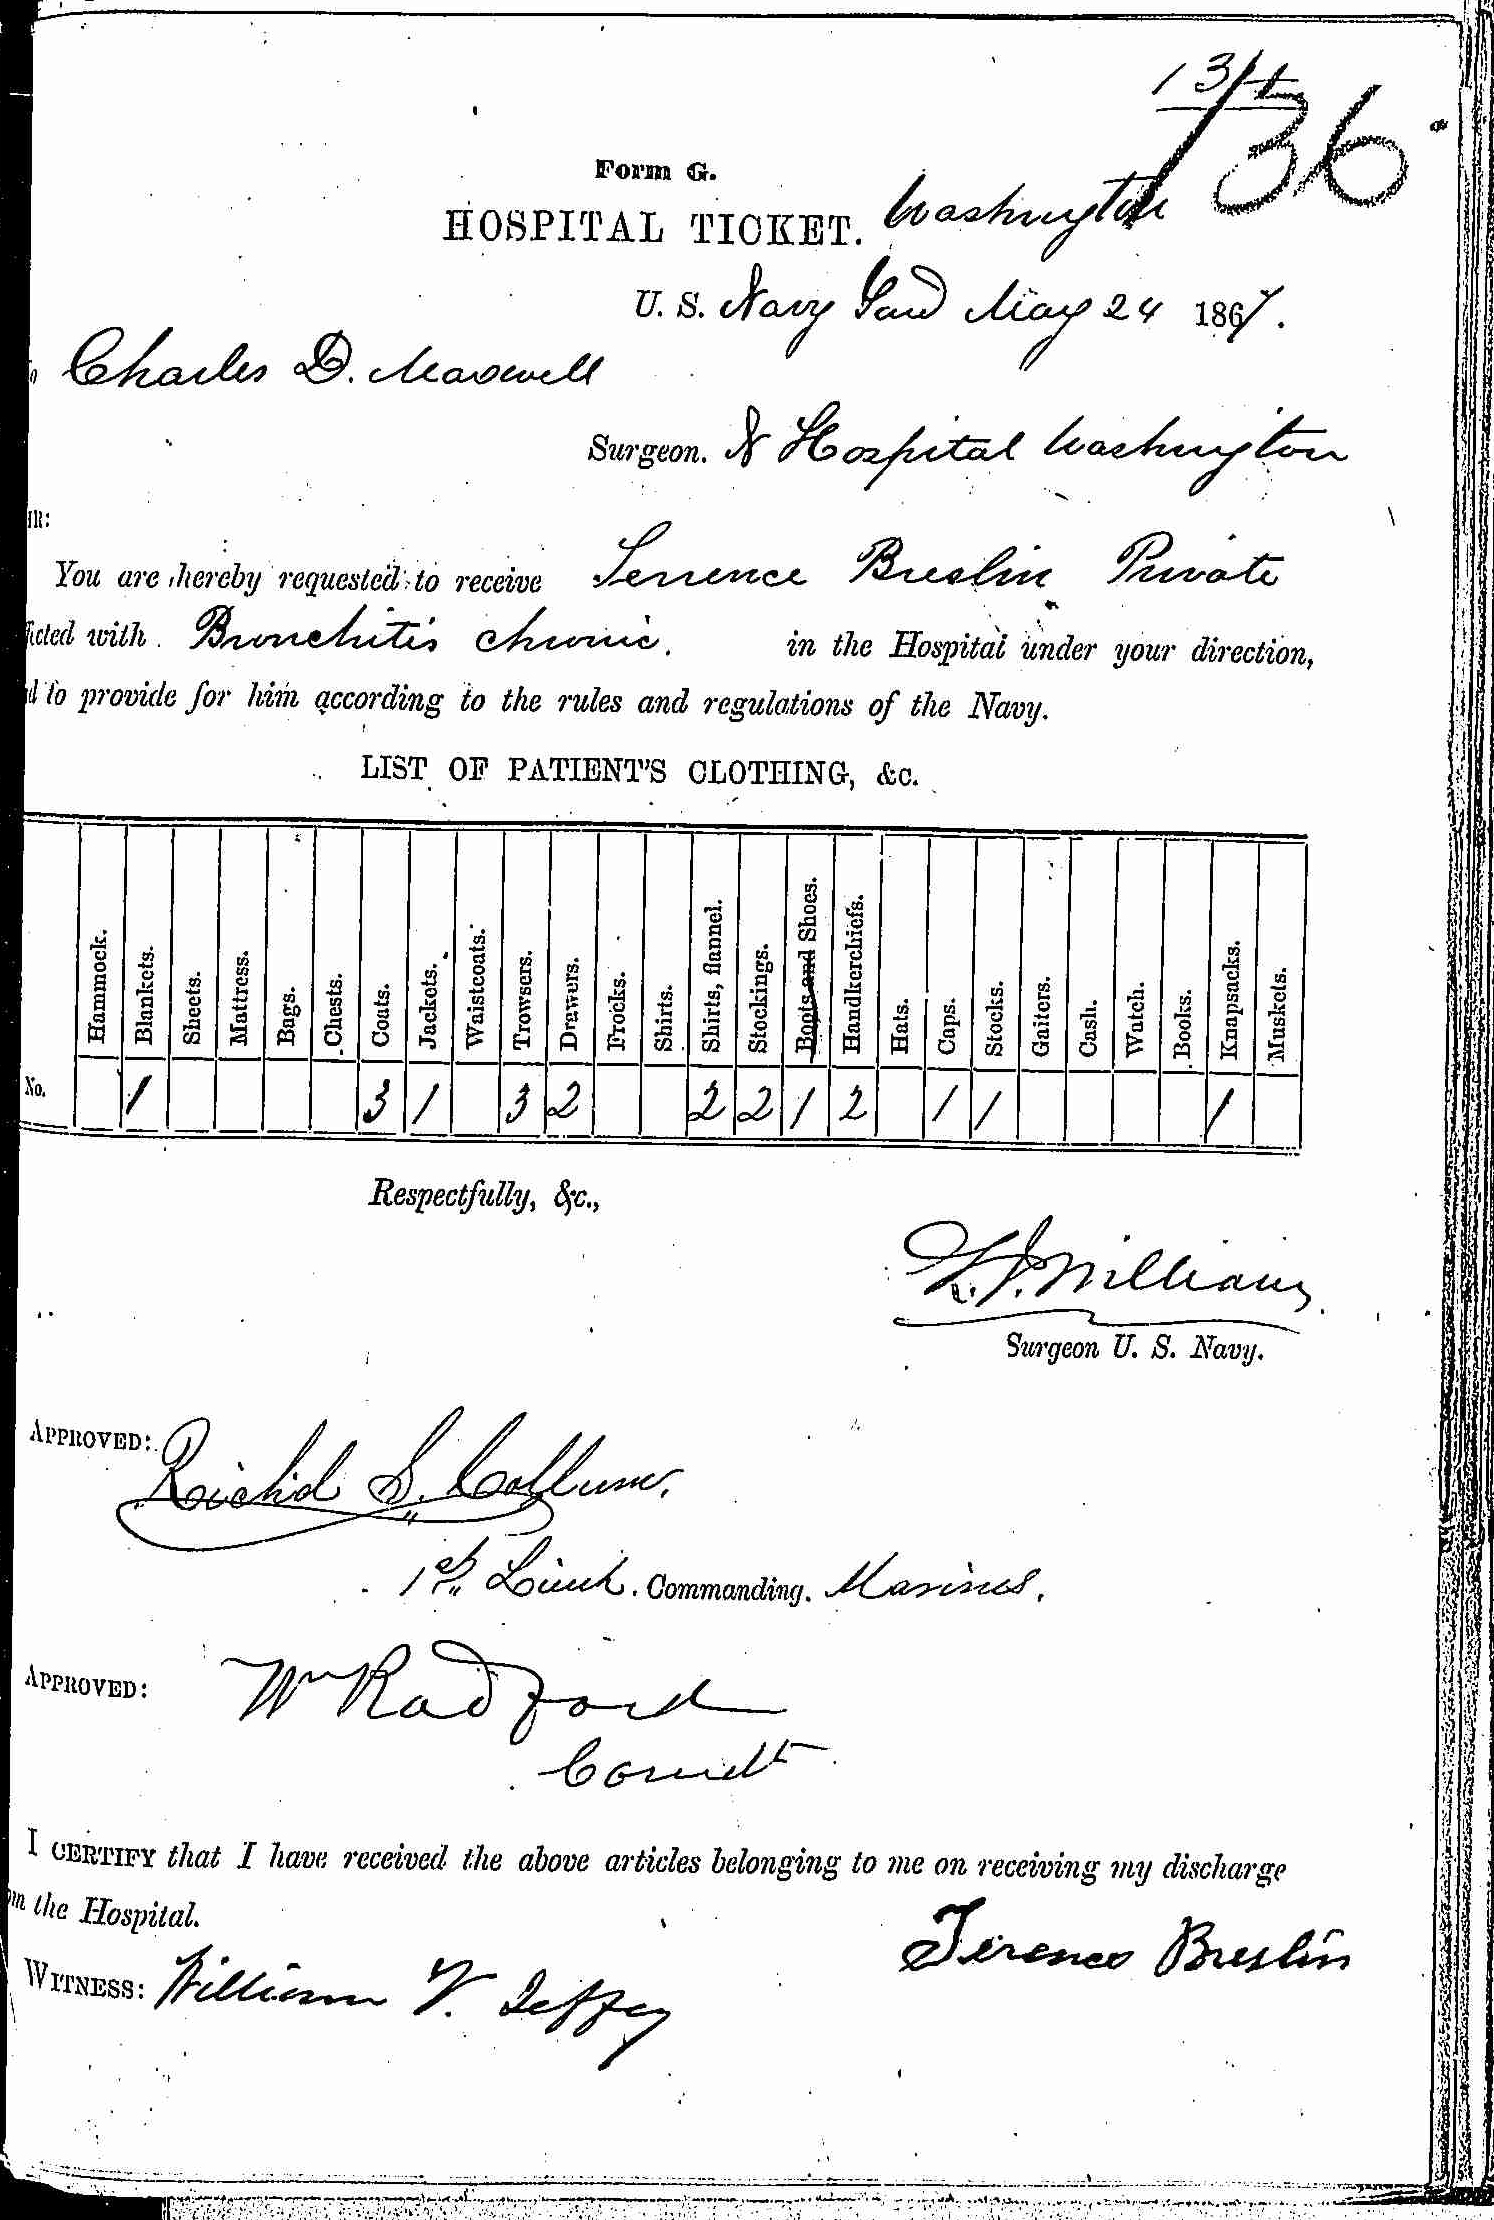 Entry for Terrence Breslin (first admission page 1 of 2) in the log Hospital Tickets and Case Papers - Naval Hospital - Washington, D.C. - 1866-68